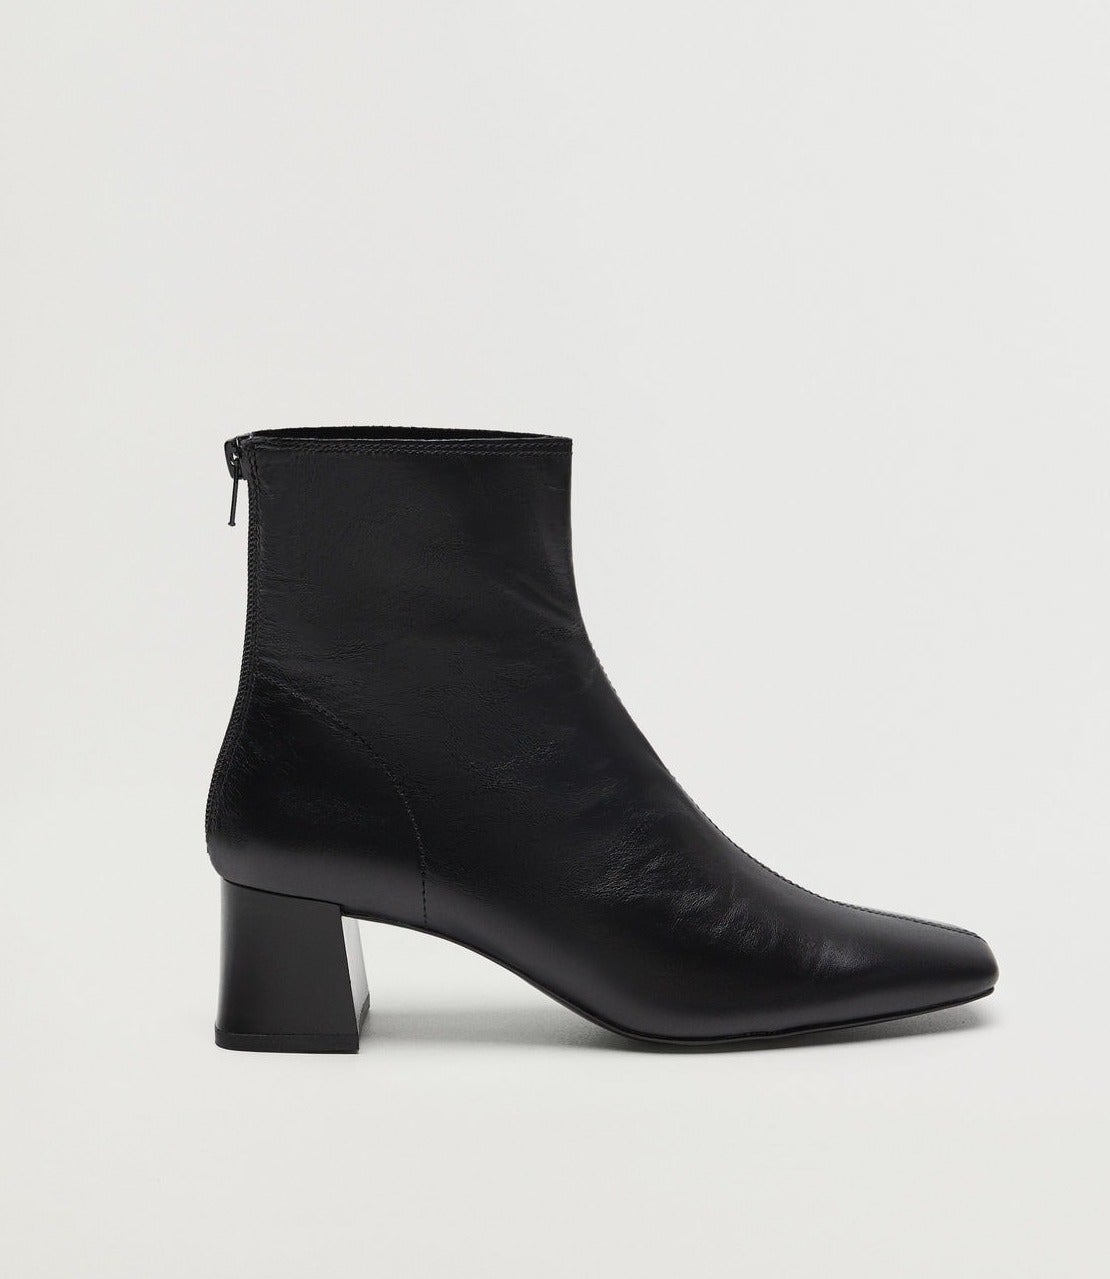 The Best Black Boots: A Definitive 